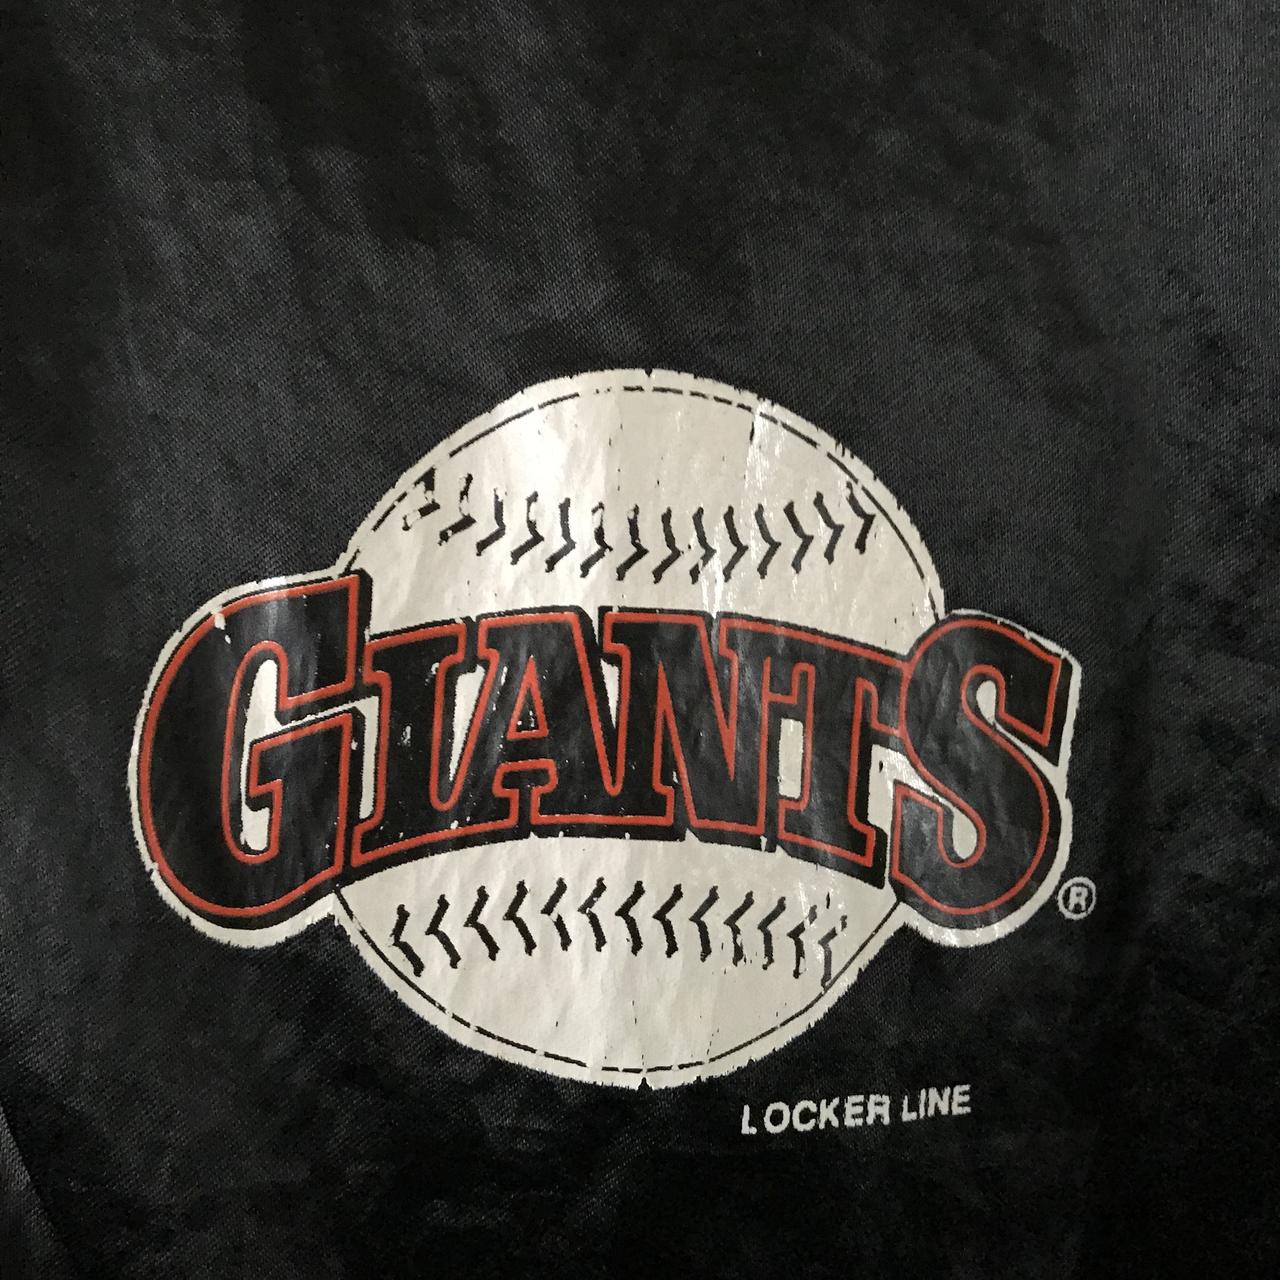 DO NOT BUY!!! OUT OF TOWN!! SF Giants vintage - Depop